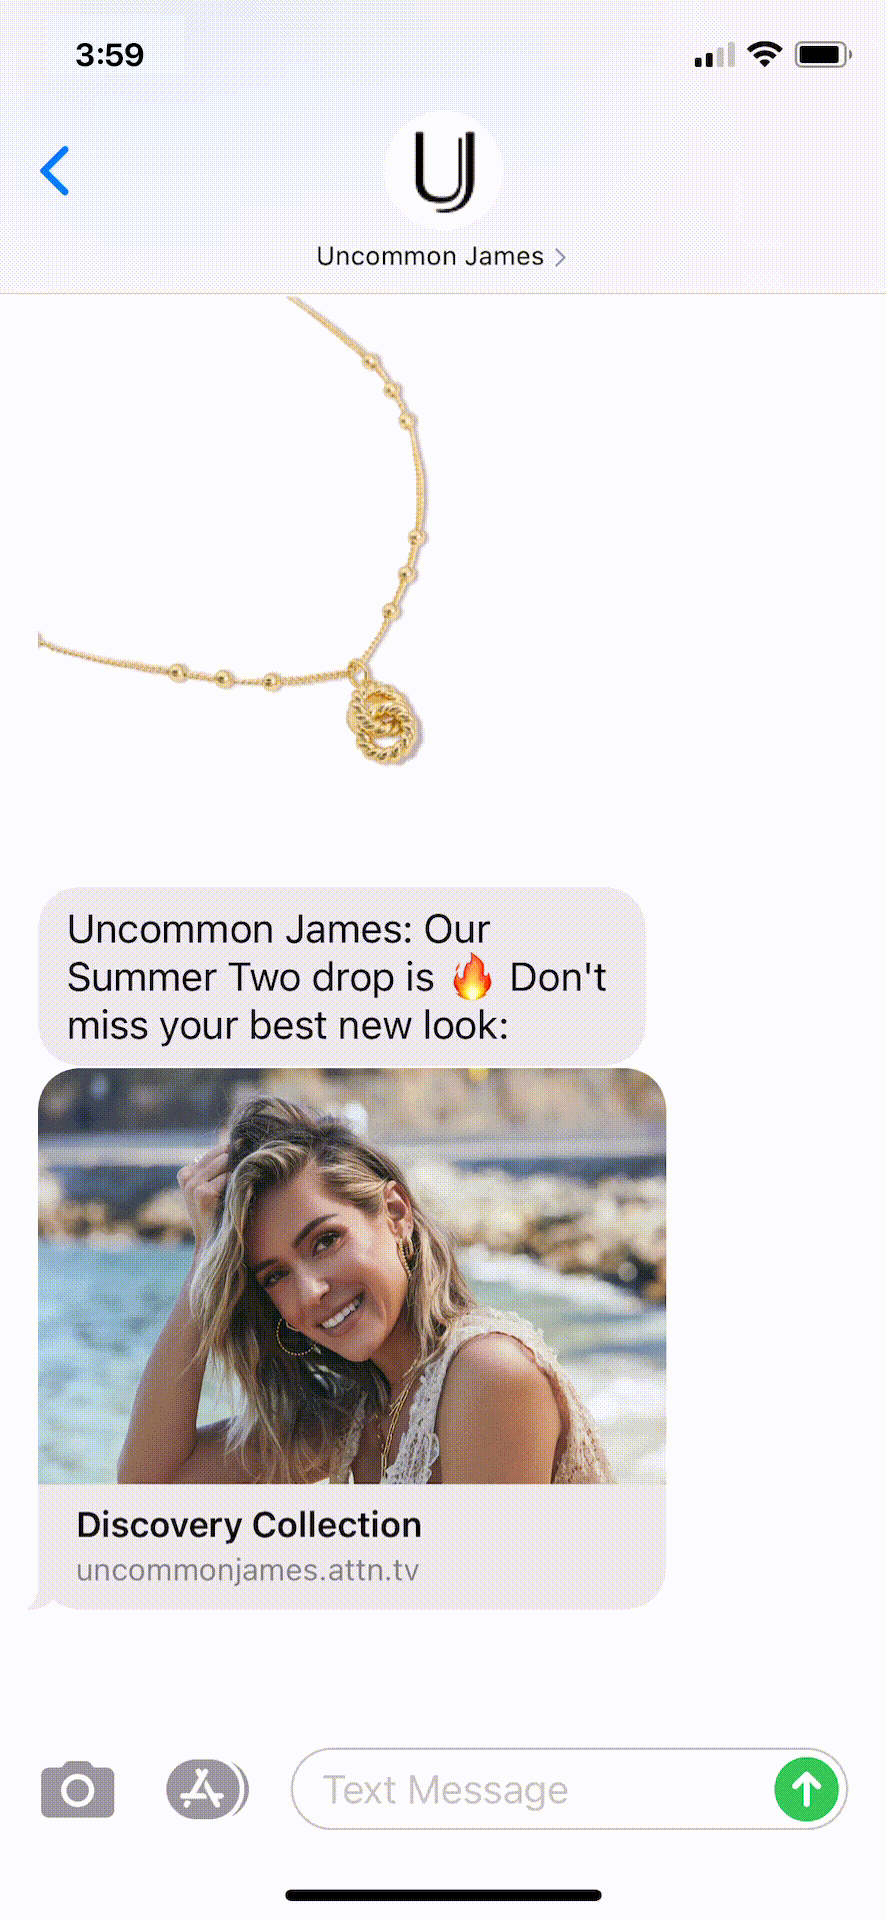 Uncommon-James-Text-Message-Marketing-Example-05.30.2021